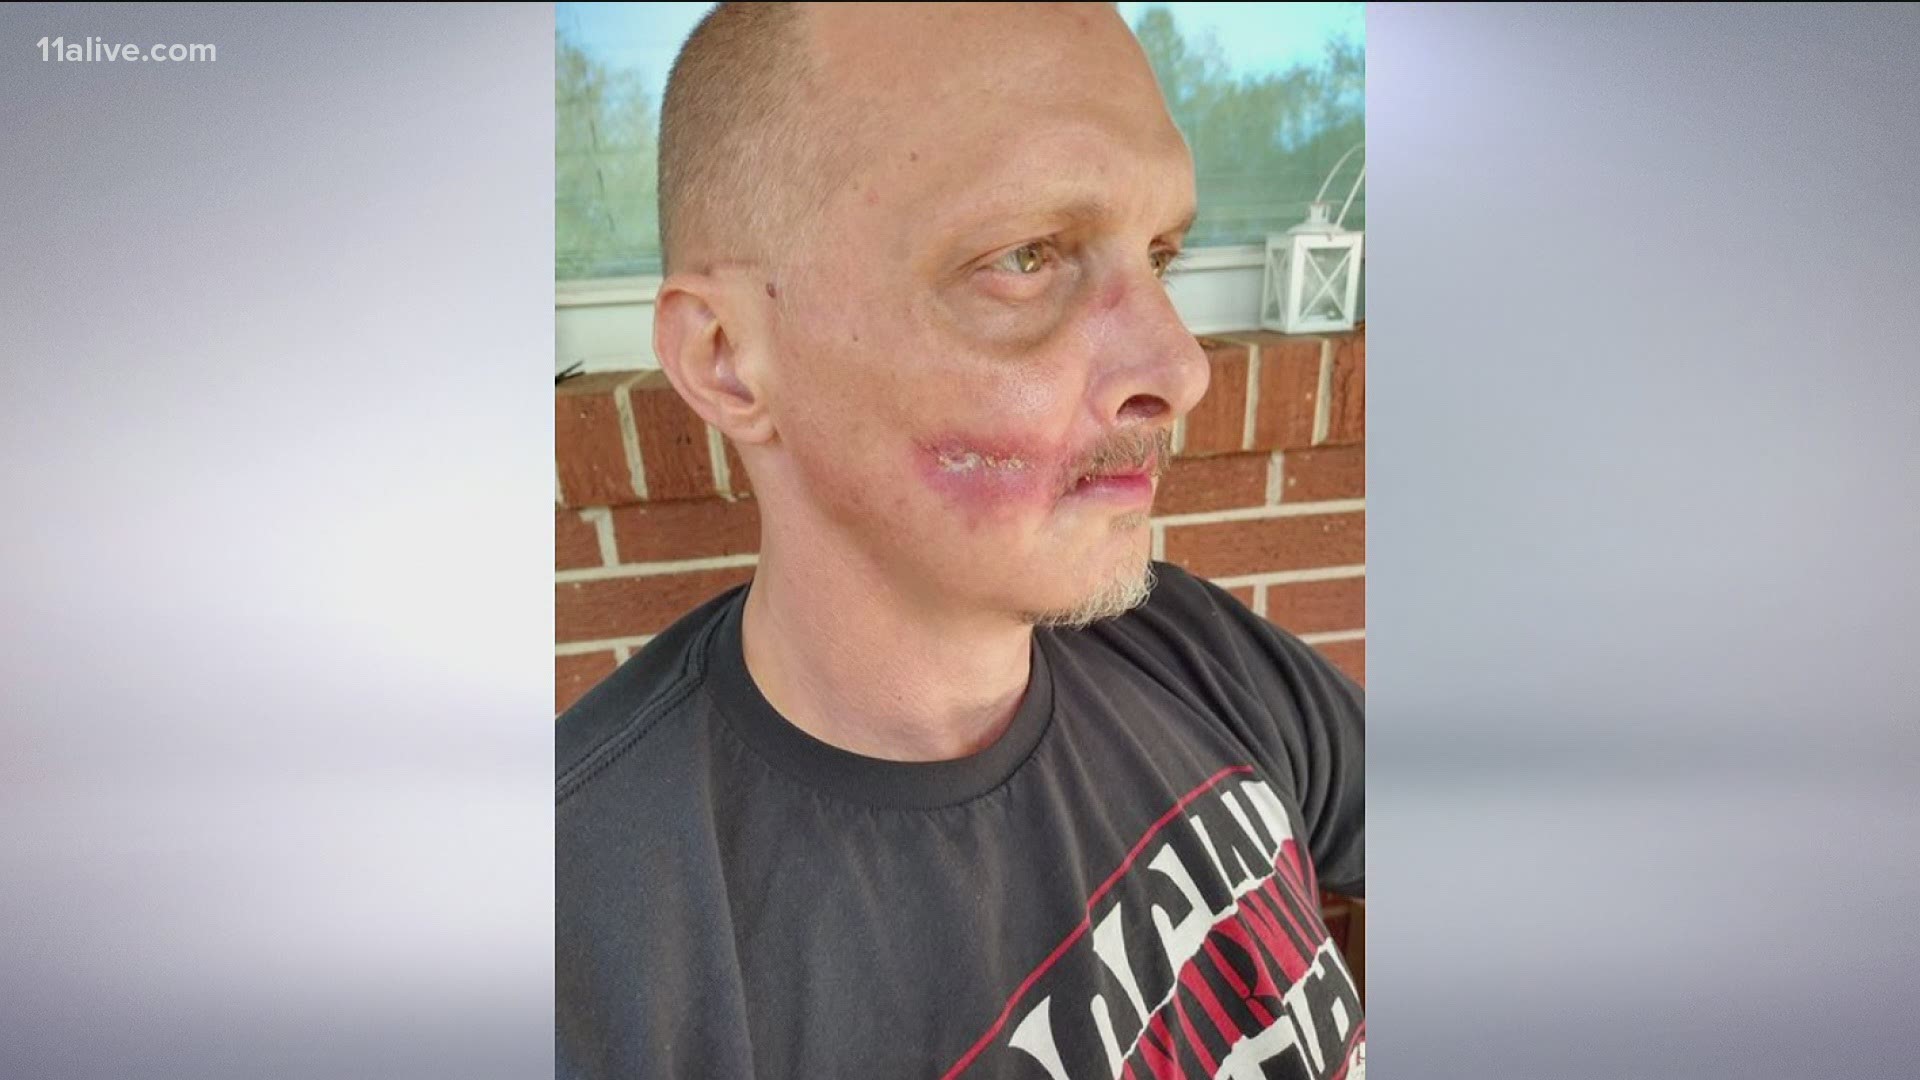 Road rage victim still healing months later, as medical expenses approach  $100K 